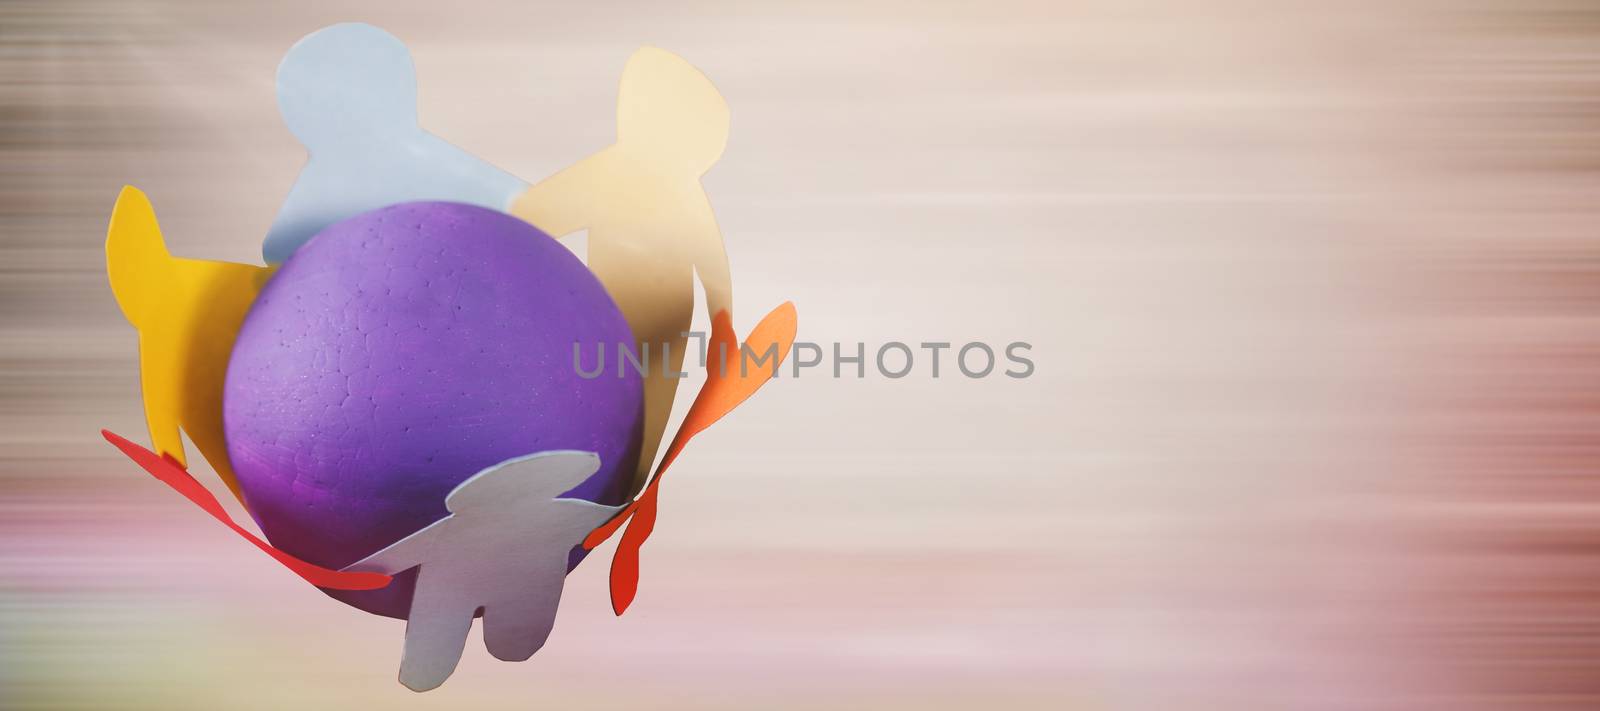 Multiple color of little person  against brown abstract image